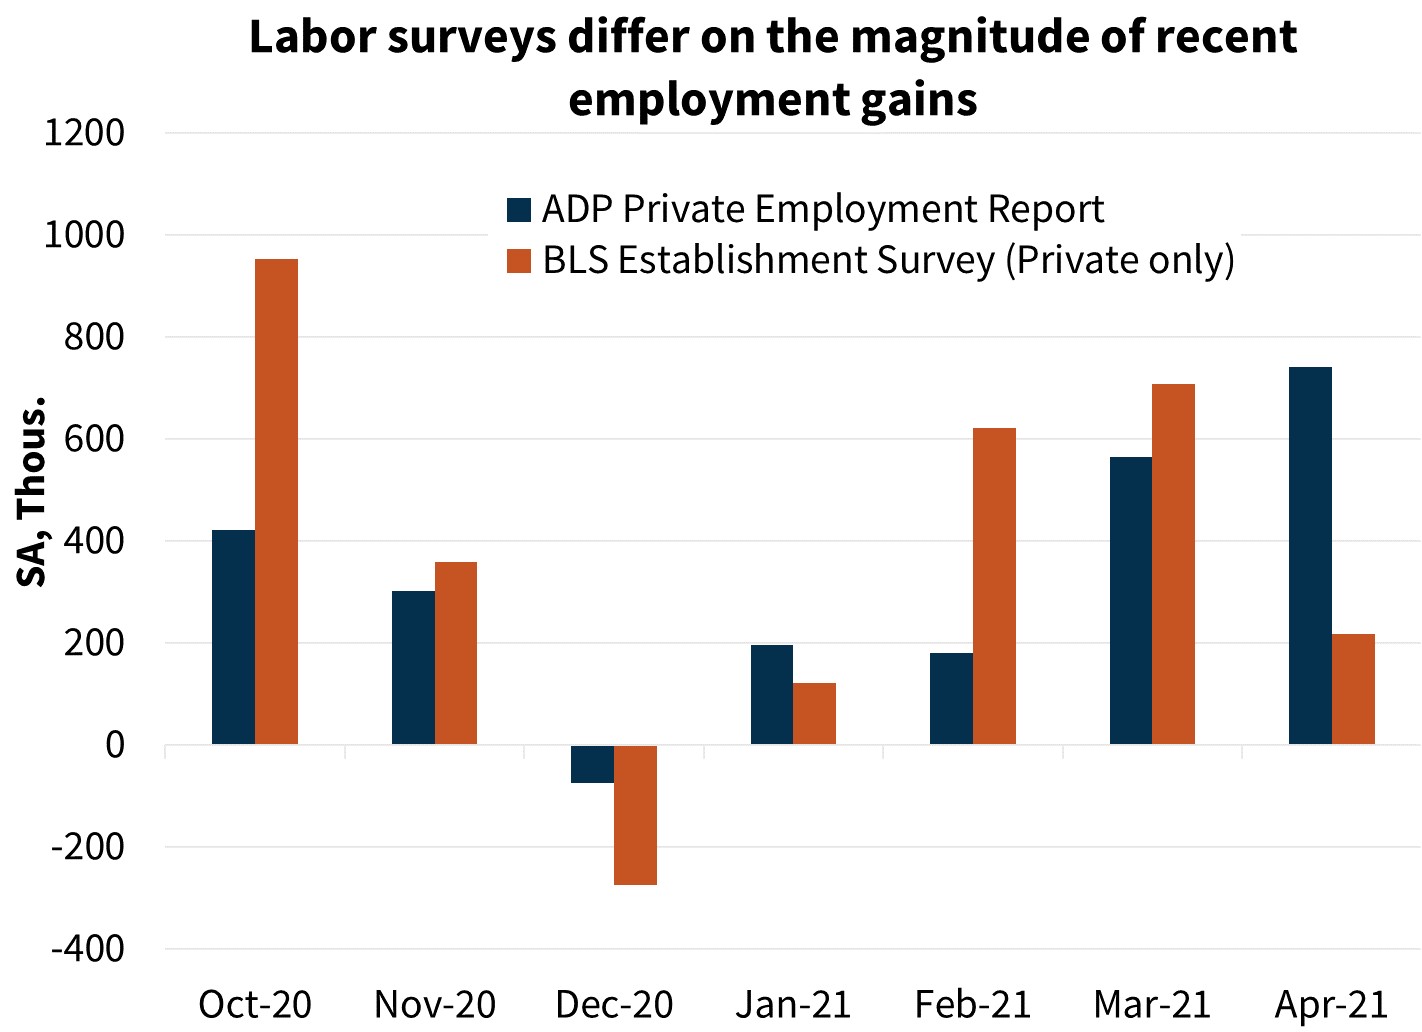  Labor surveys differ on the magnitude of recent employment gains 